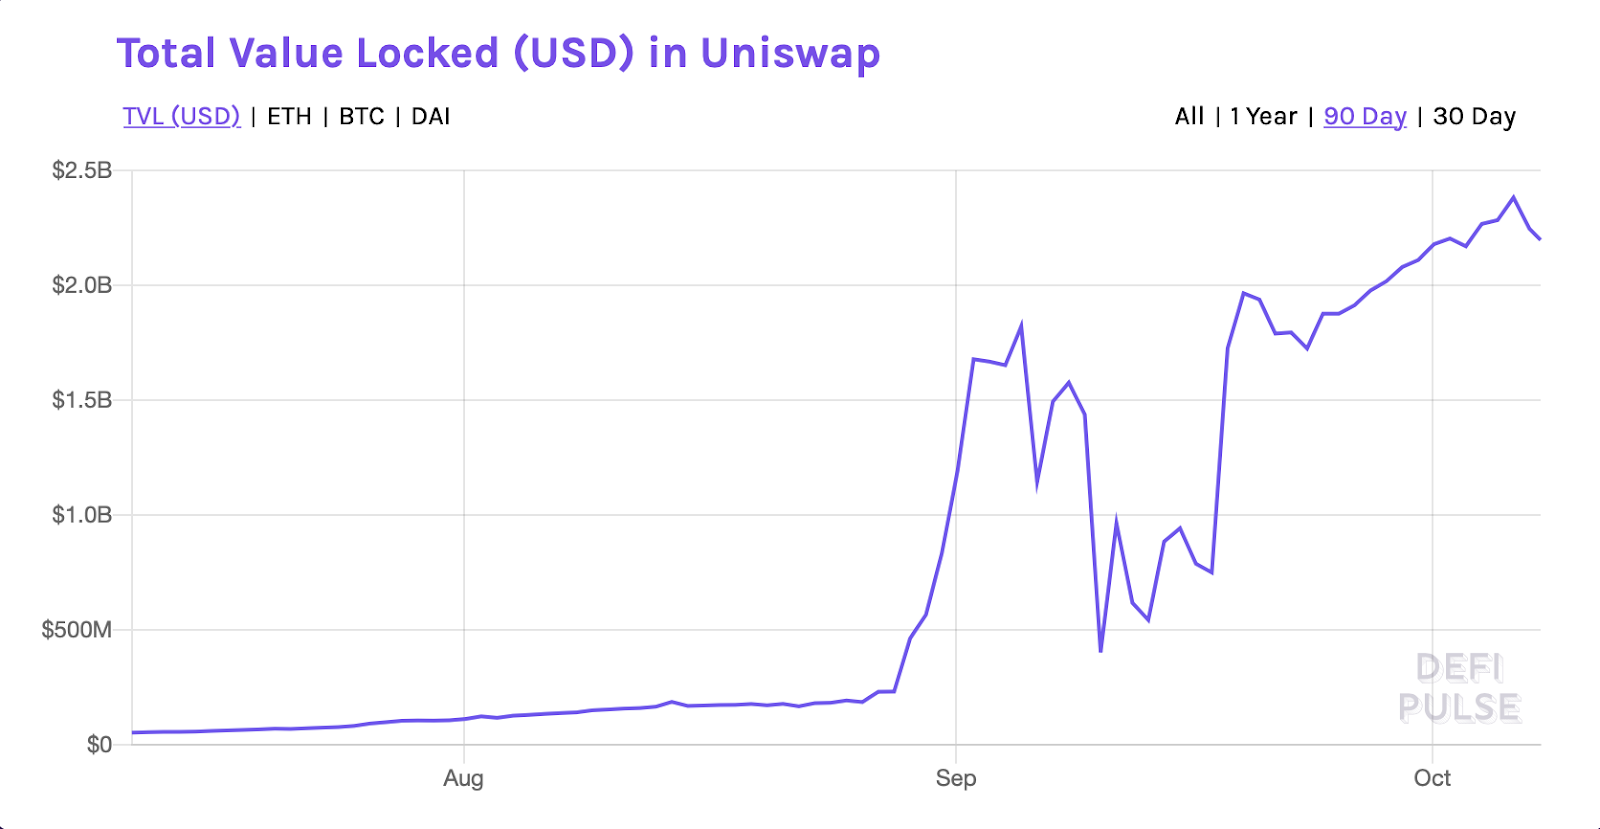 SushiSwap and the UNI token were launched just before those spikes